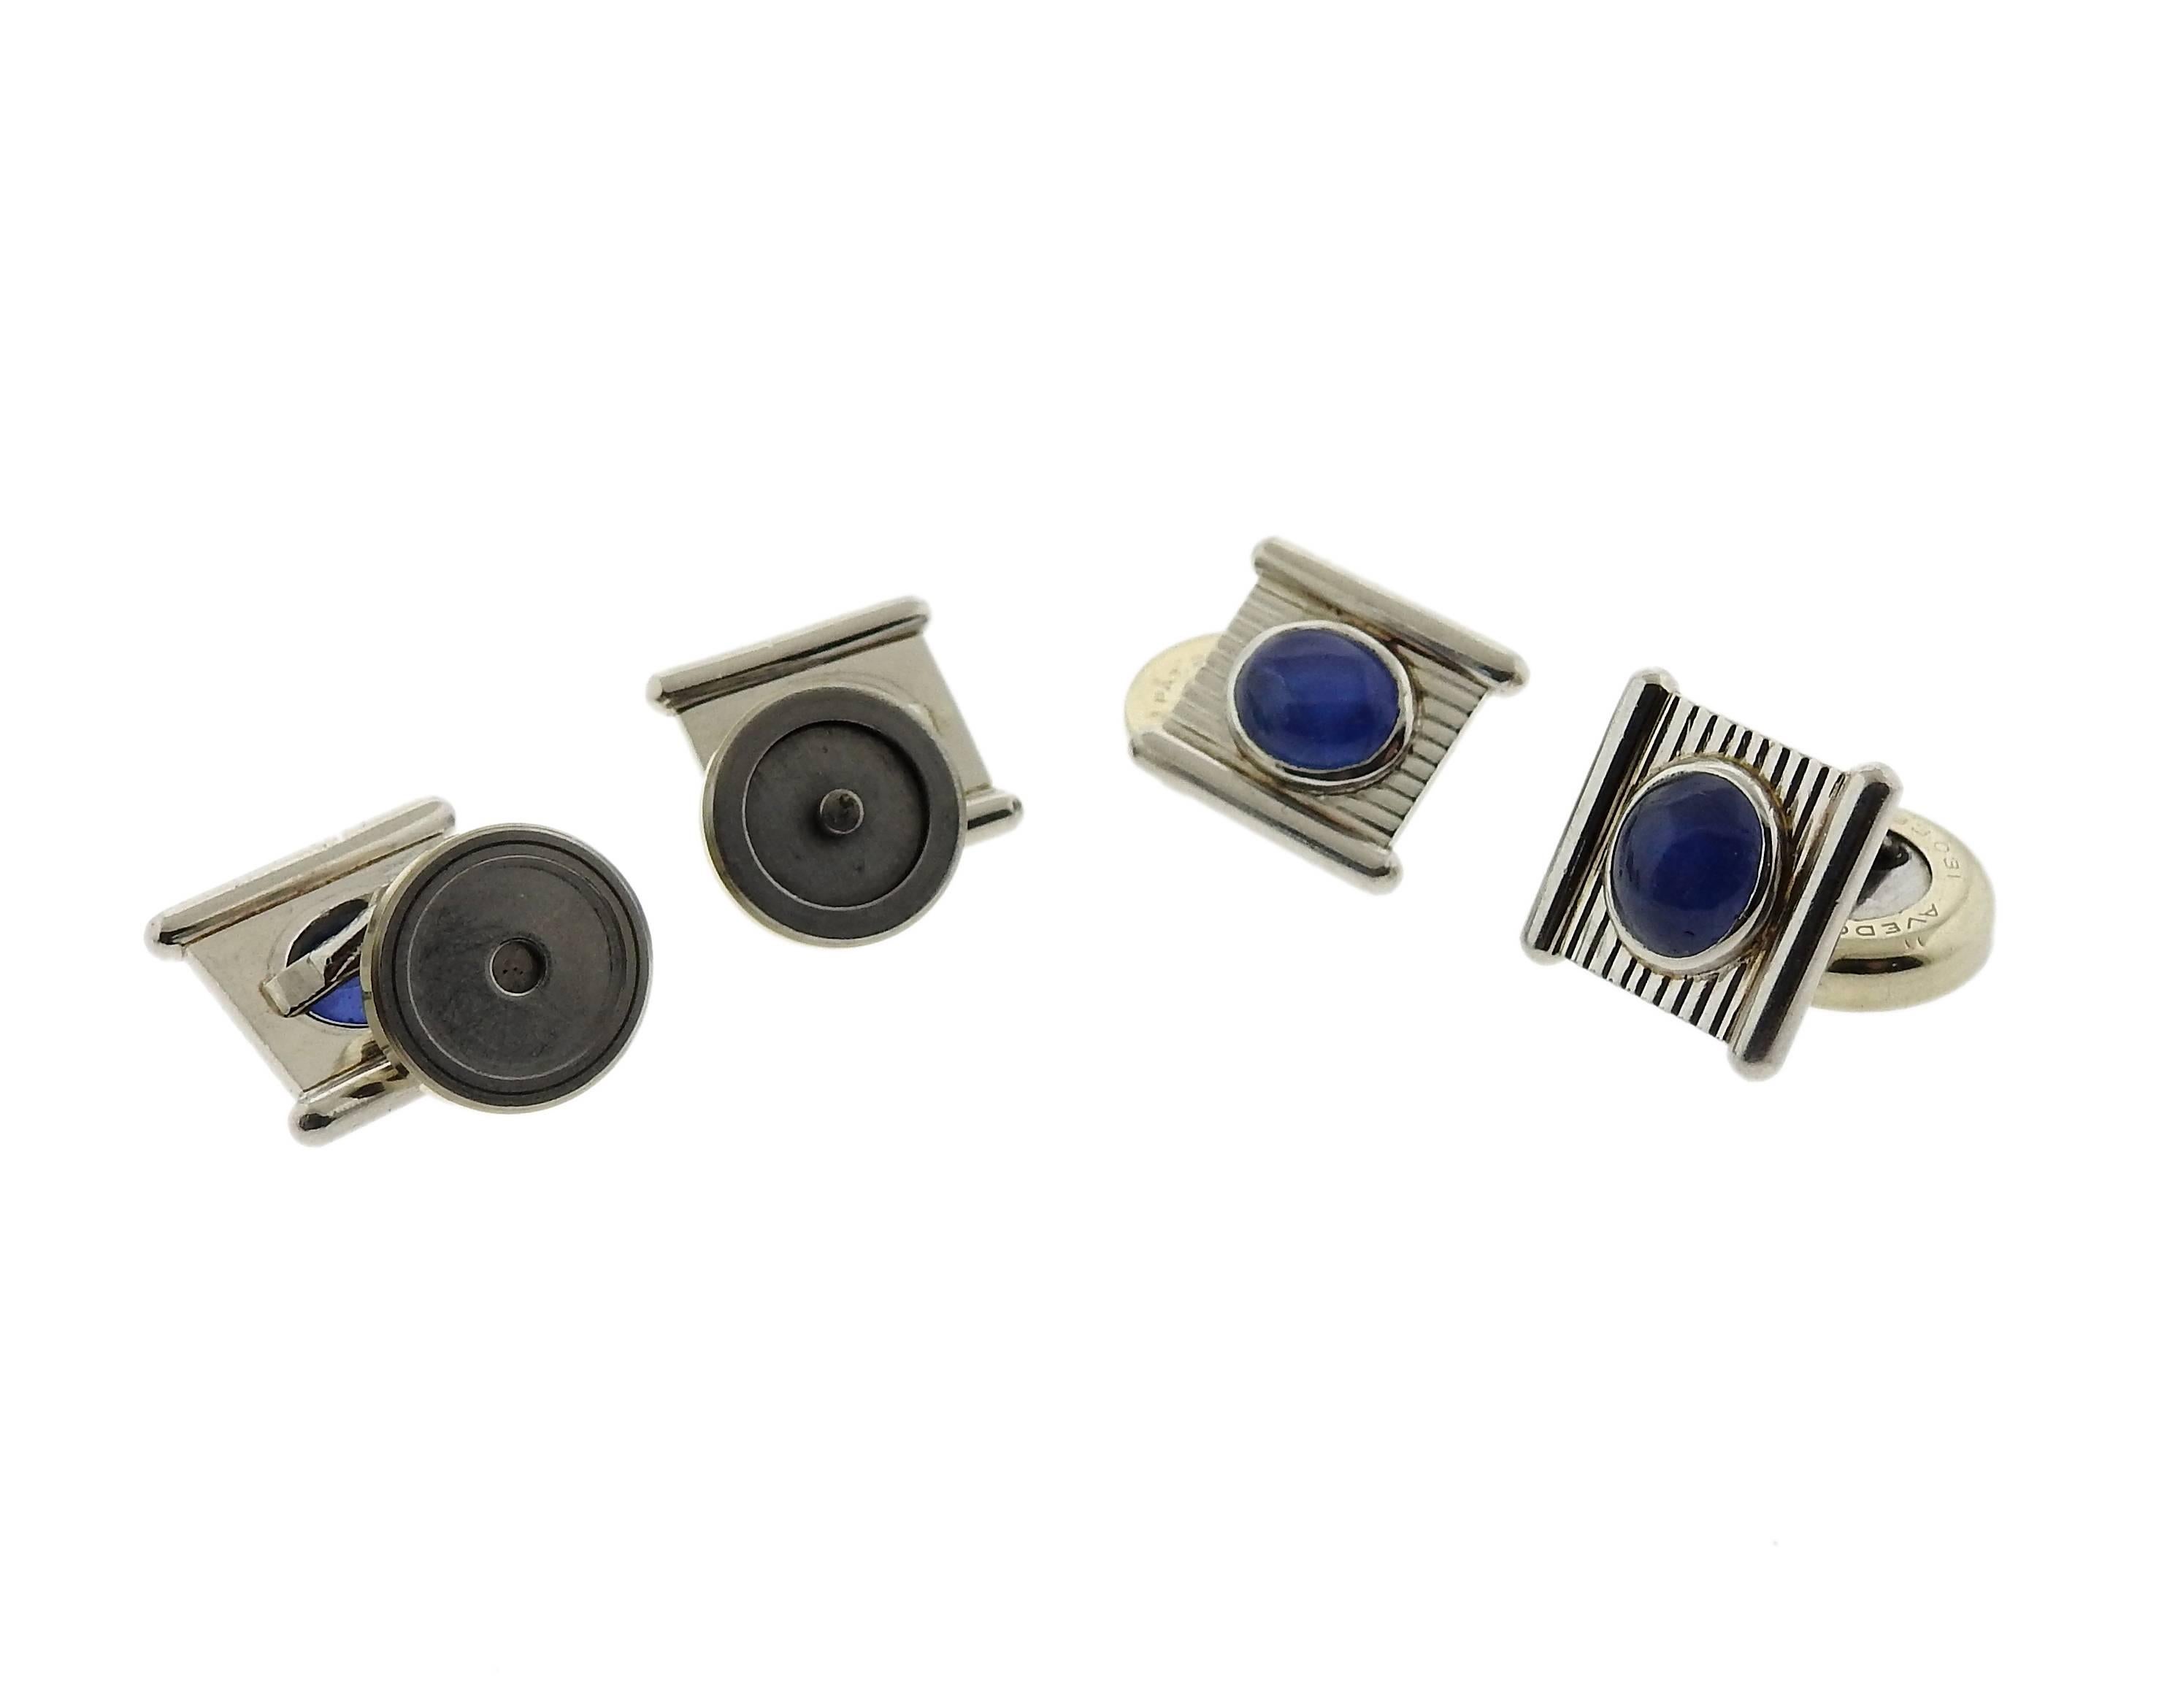 Platinum Mid Century cufflinks and studs set, crafted by Avedon, set with star sapphire cabochons . Cufflink top is 14mm x 15mm, stud top - 10mm x 11mm. Marked: plat. (cufflink middle part with magnet is 14k), Avedon. Weight of the set - 43.1 grams 